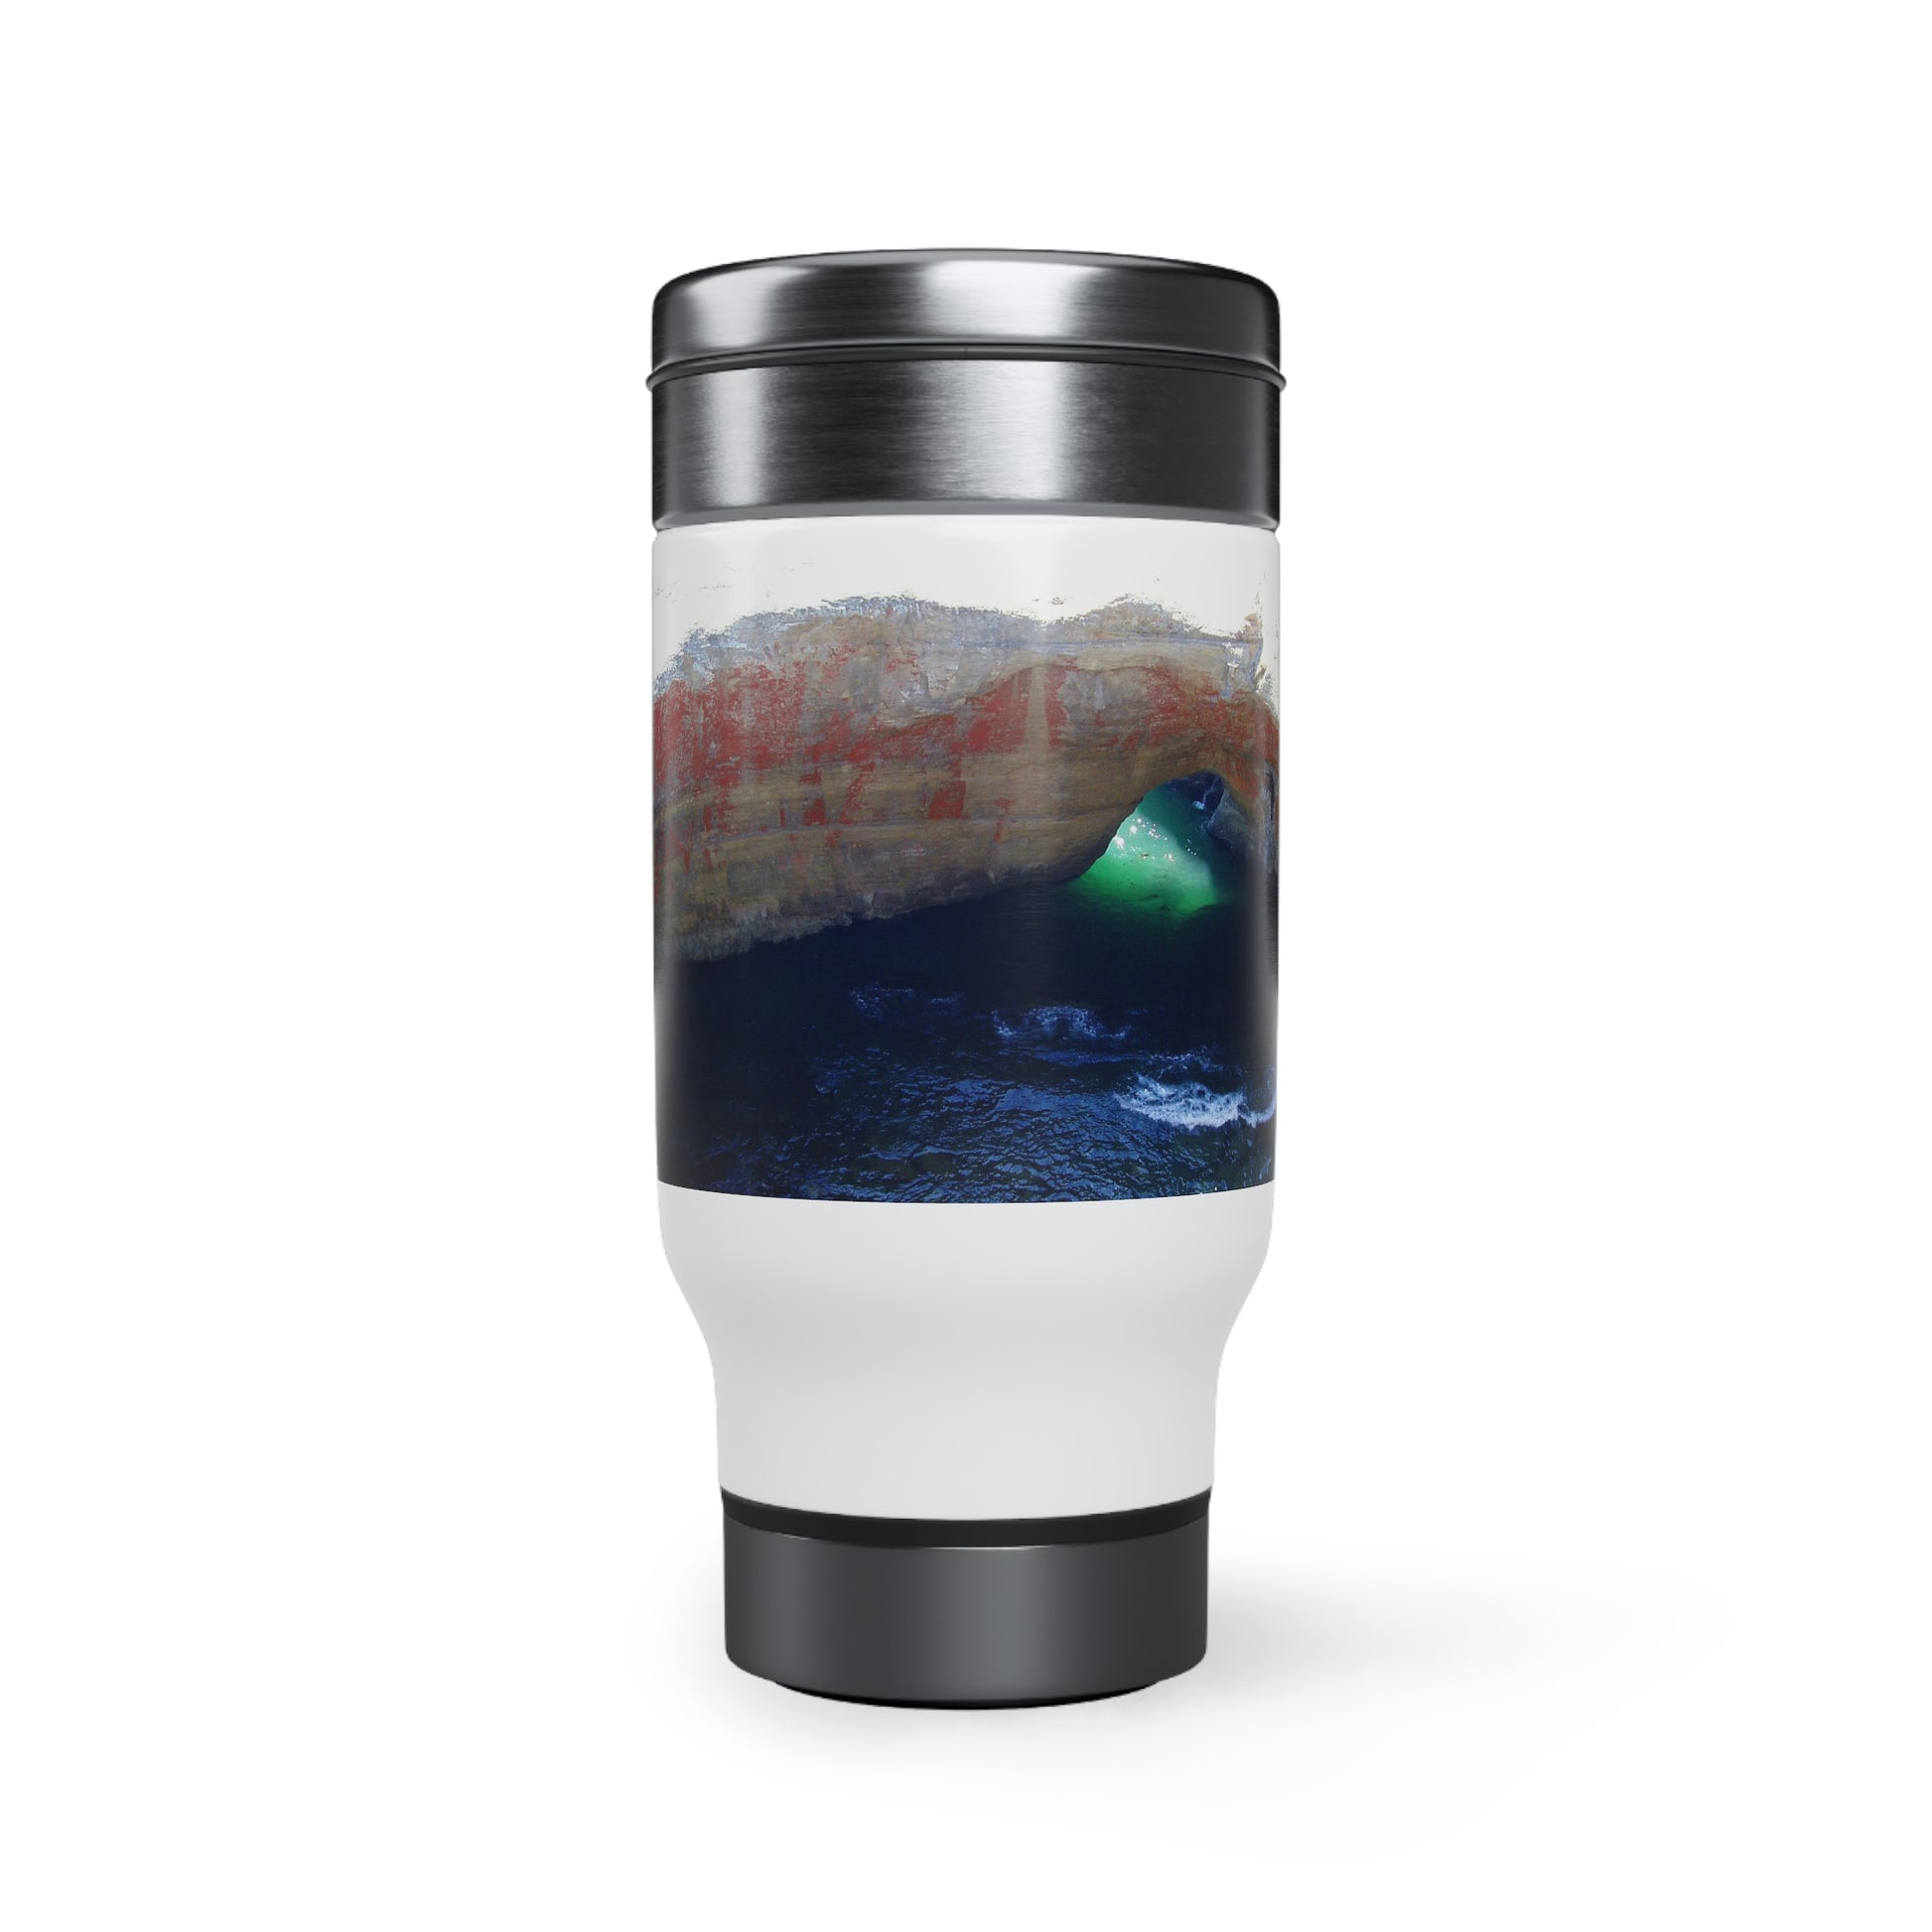 The Devil's Cauldron's Oasis - Stainless Steel Travel Mug with Handle, 14oz - Fry1Productions